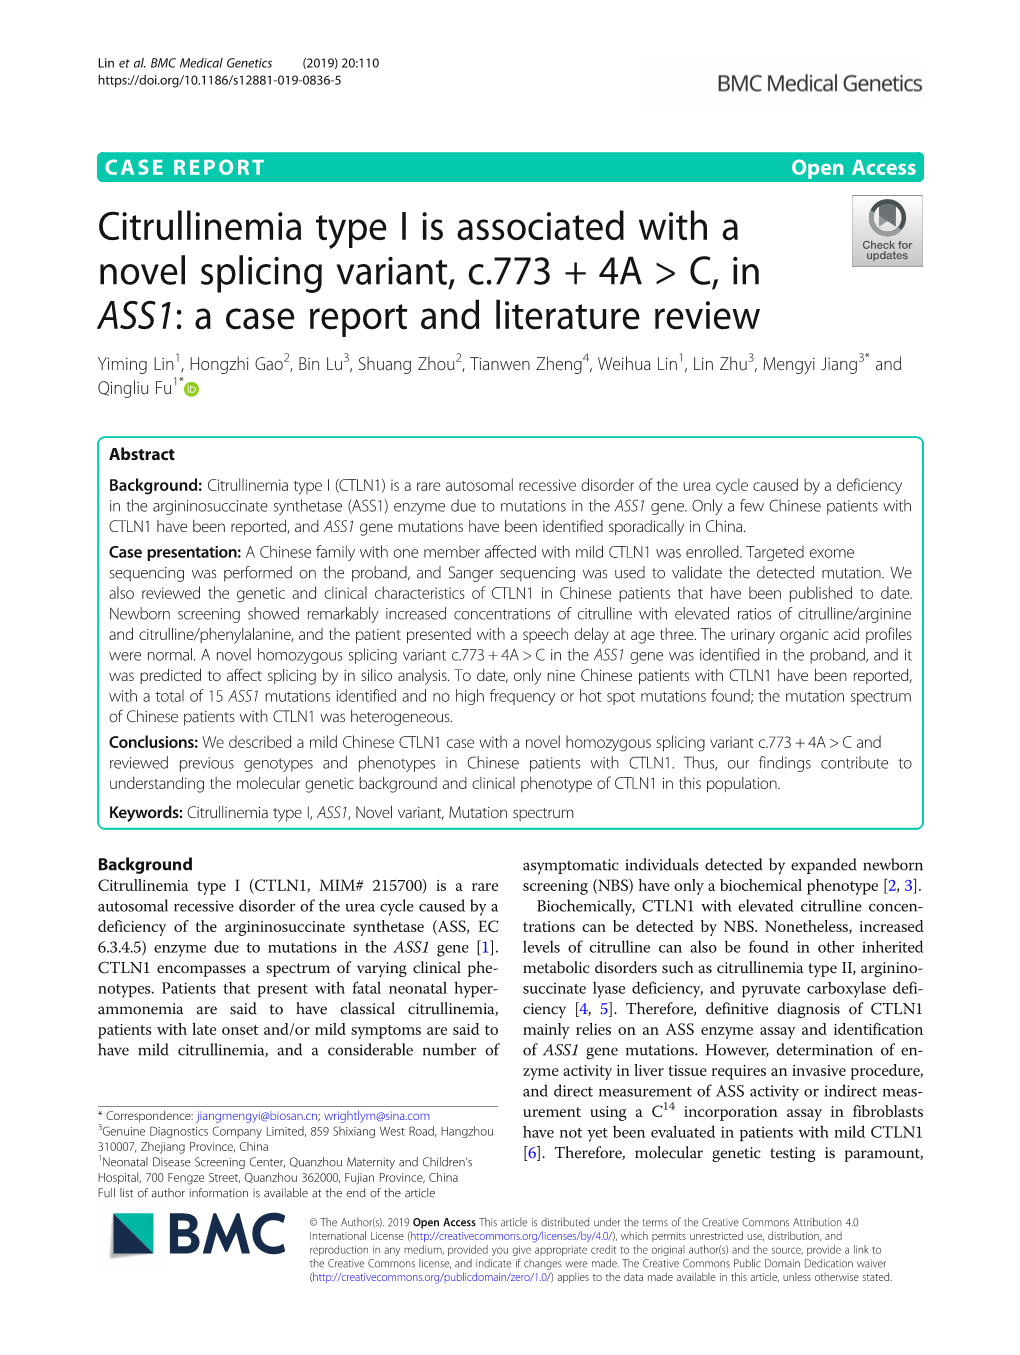 Citrullinemia Type I Is Associated with a Novel